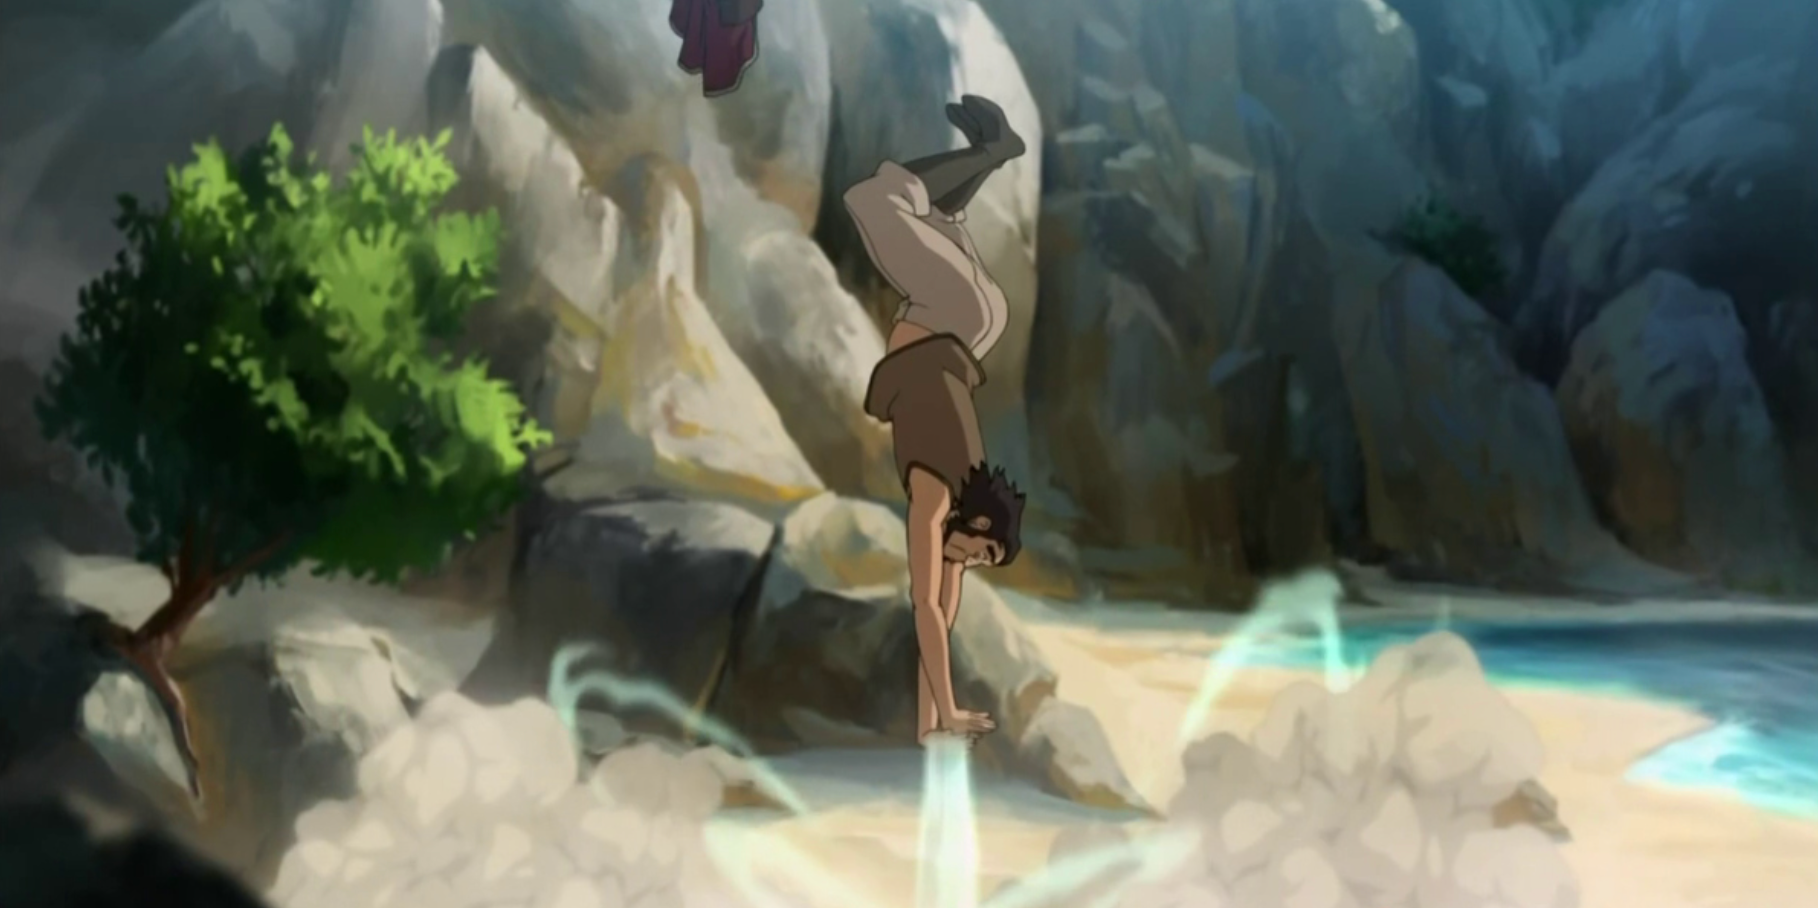 Bumi using airbending to stop himself from falling